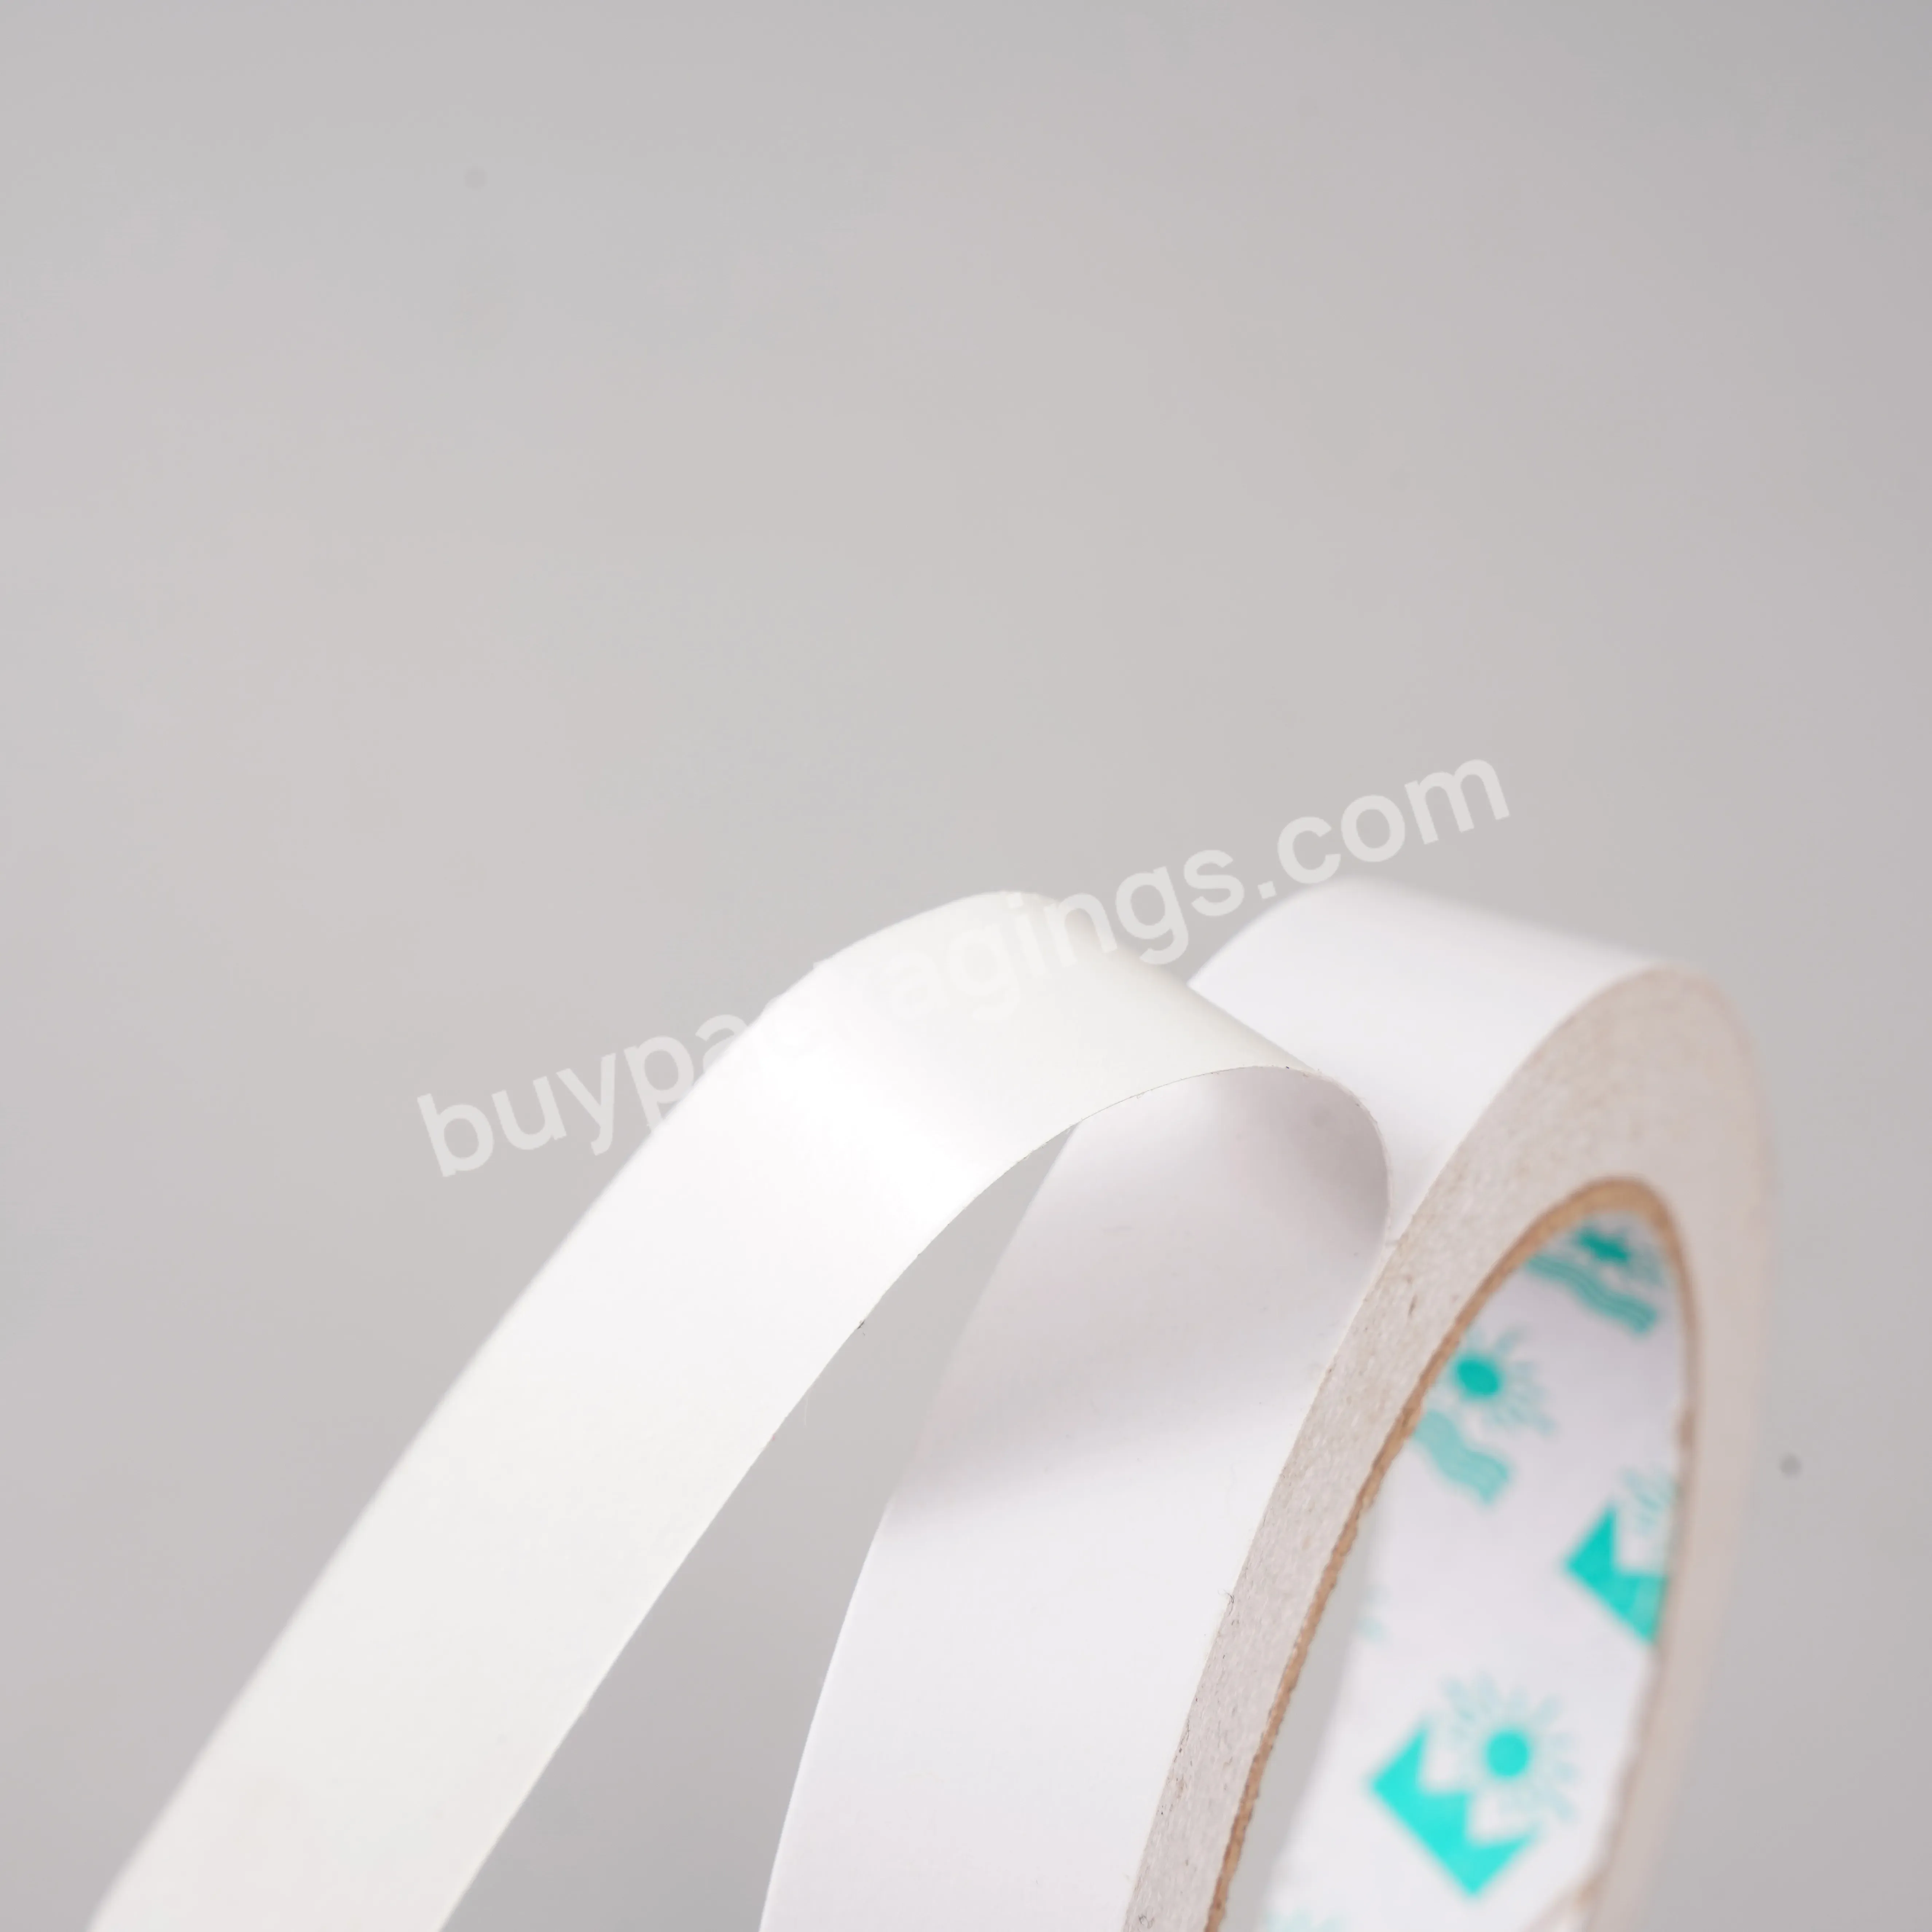 Factory Customized Size Cotton Paper Double-sided Adhesive Tape Used For Office And School Places - Buy Double Sided Tape,Double-sided Adhesive Tape For Work Office,Hot Fix Tape.